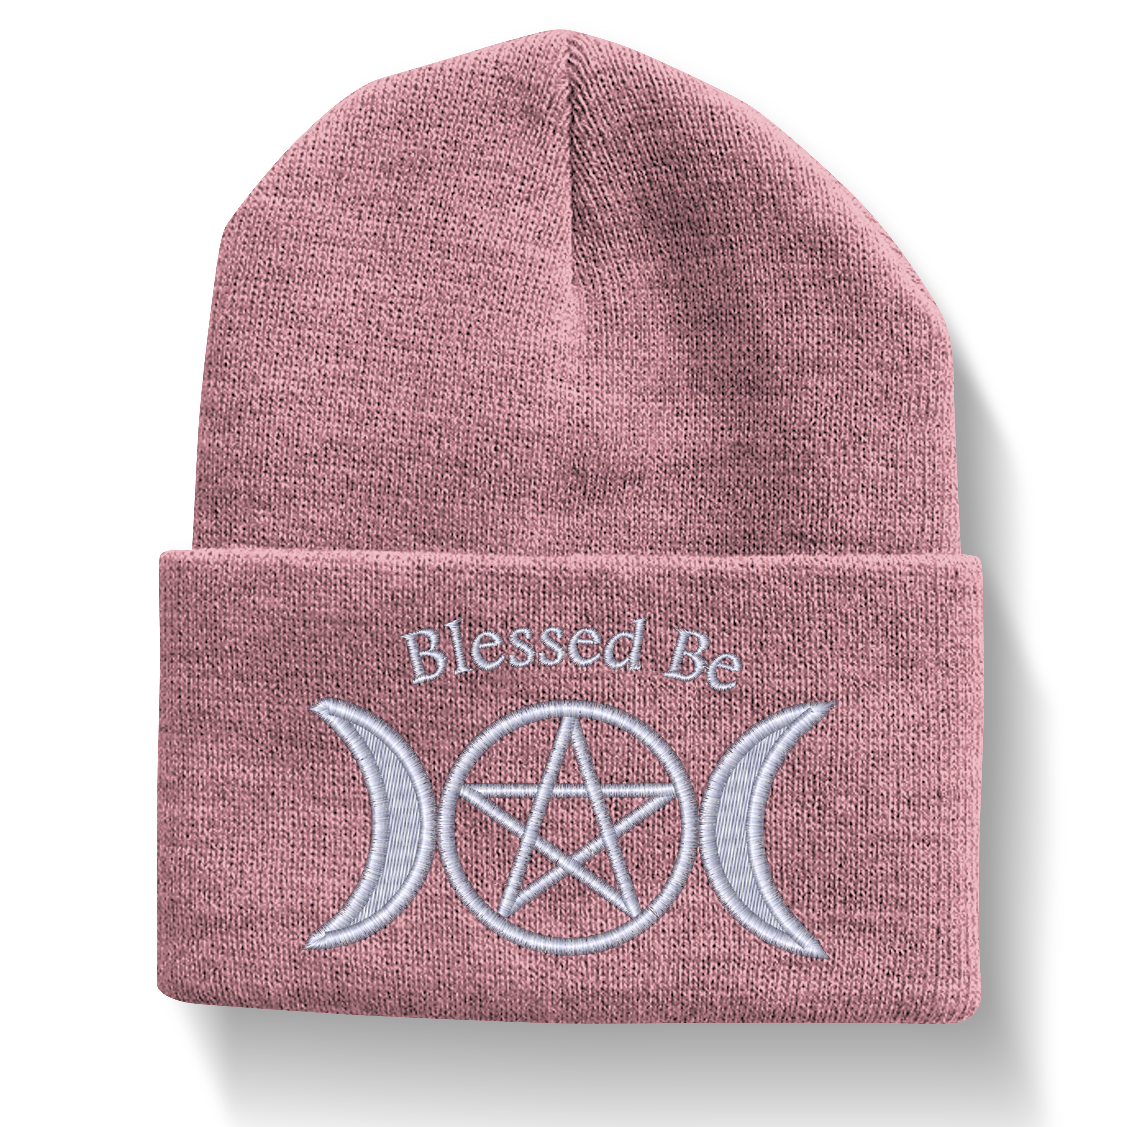 Blessed Be Beanie